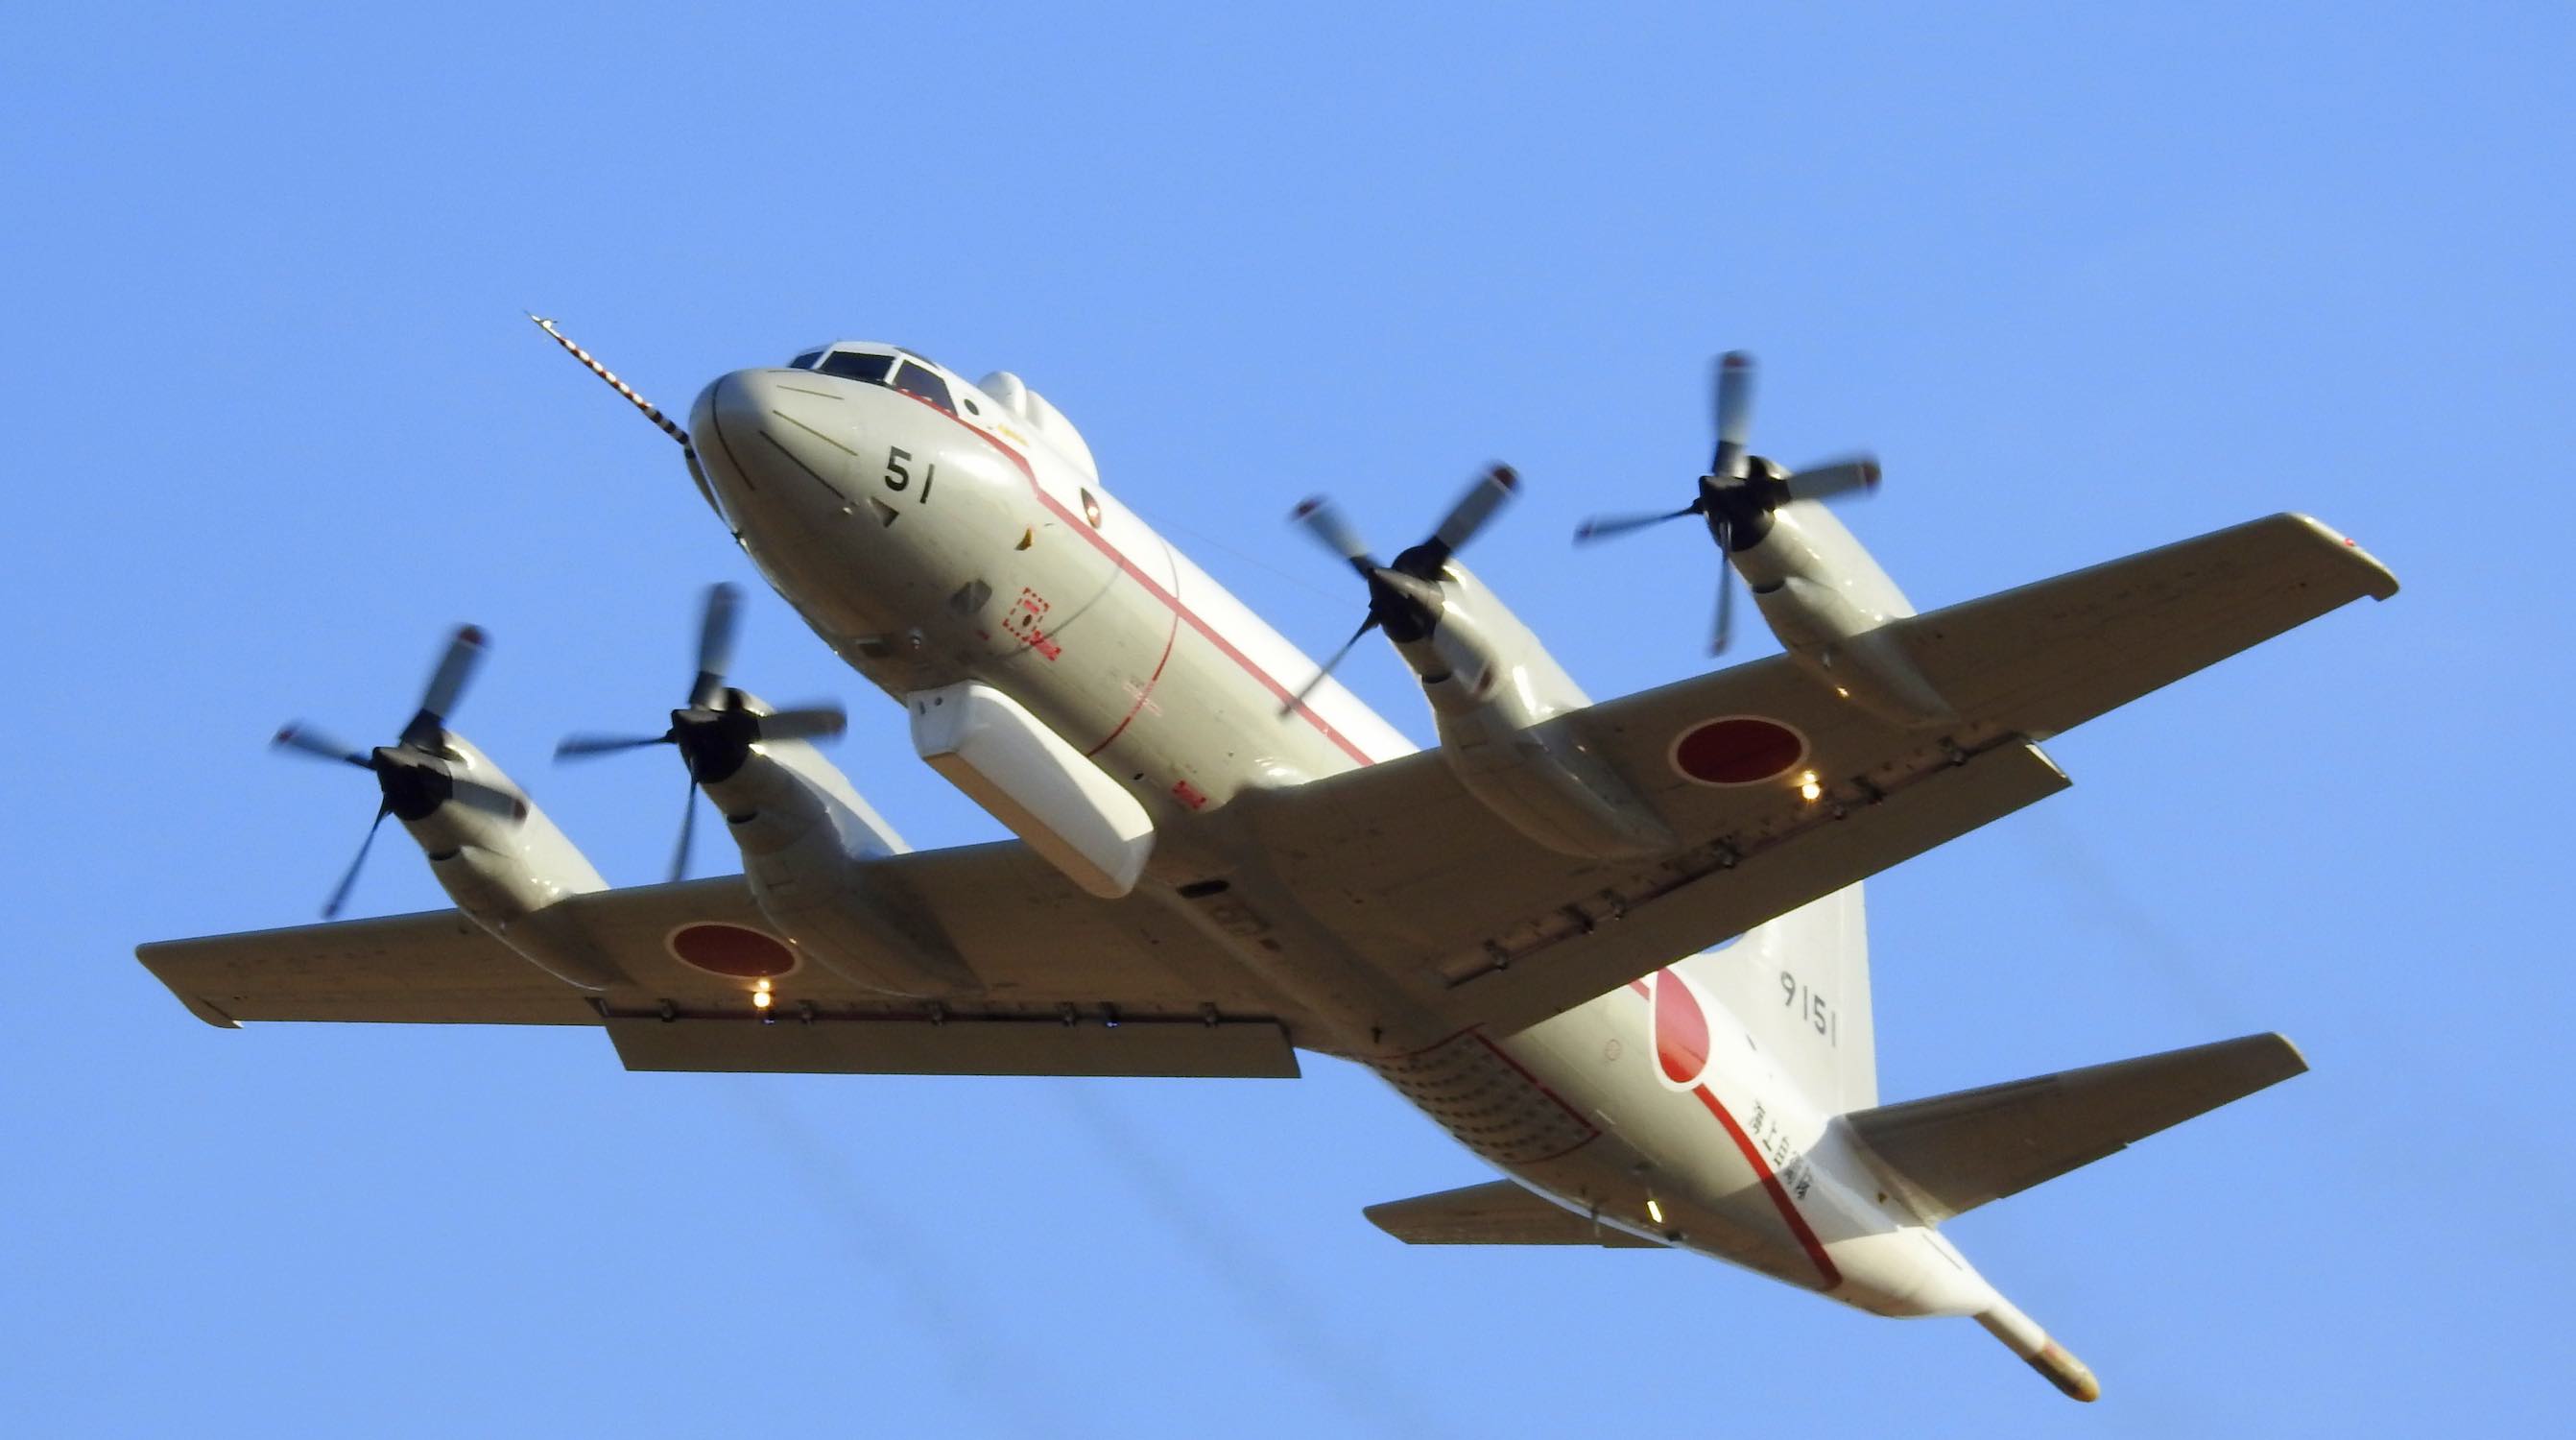 Japan Maritime Self-Defence Force P-3C Orion in Japan